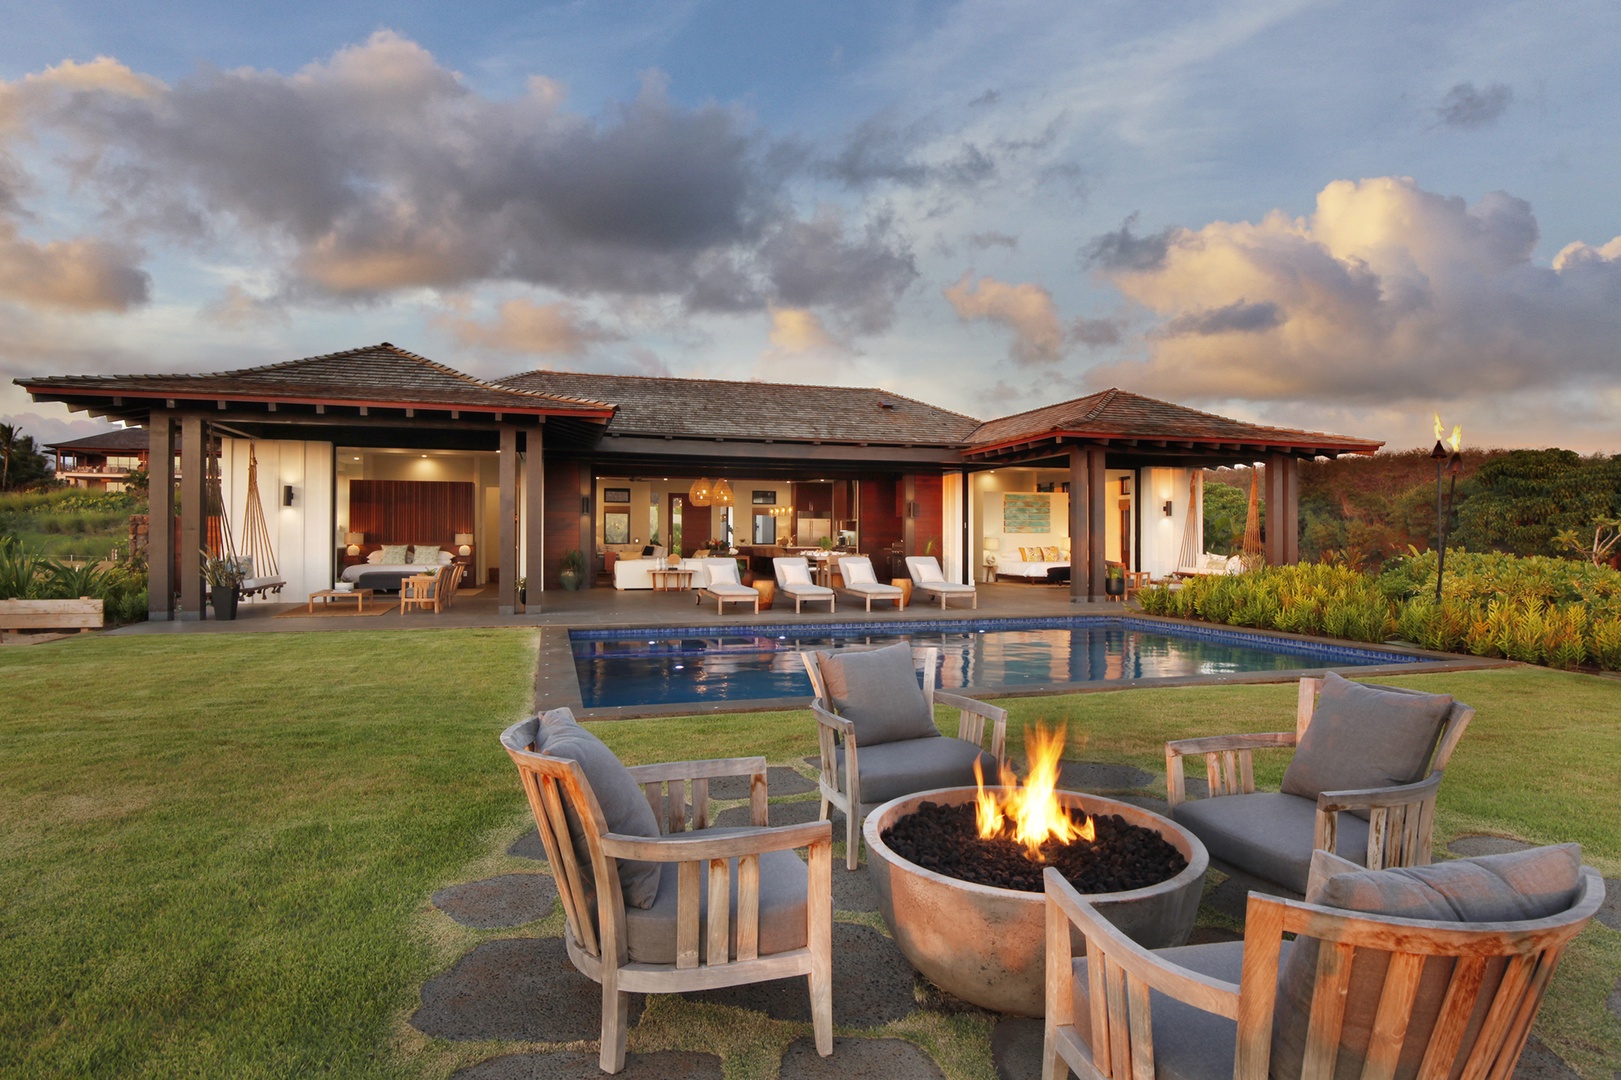 Koloa Vacation Rentals, Hale Pomaika'i Mau - The outdoor space is perfect for entertaining with a private pool and firepit